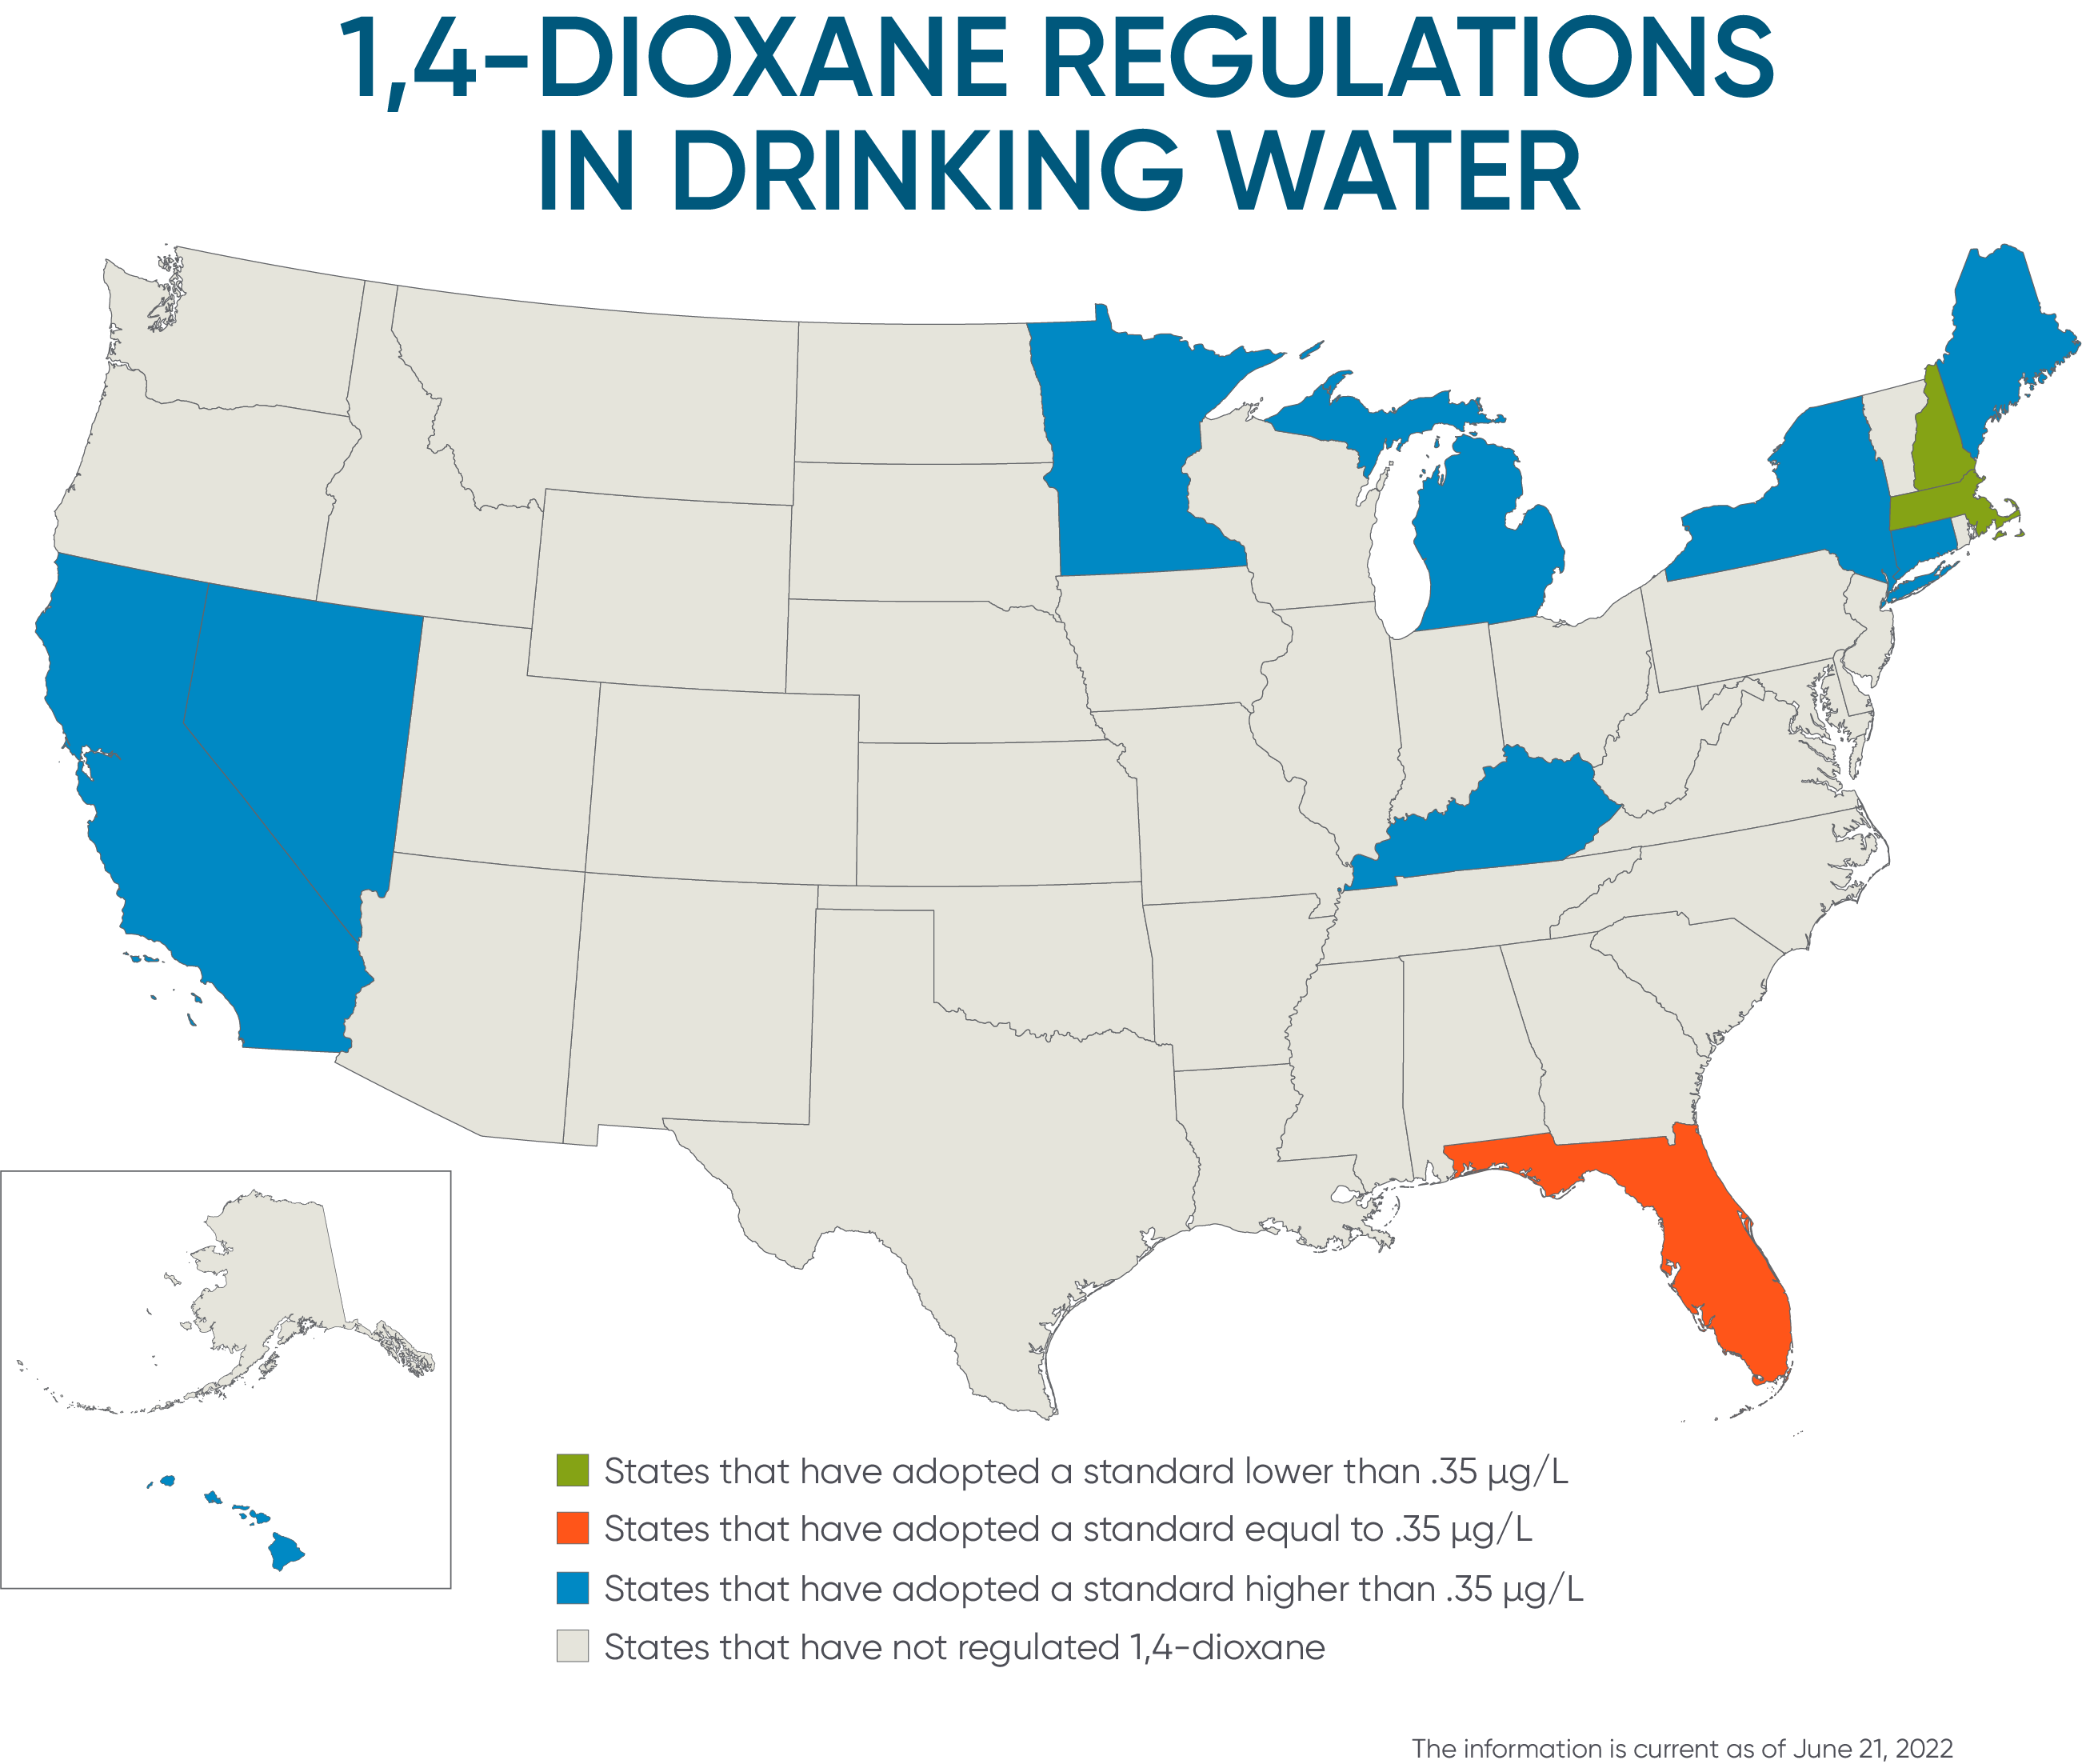 State By State Regulation Of 1,4 Dioxane In Drinking Water